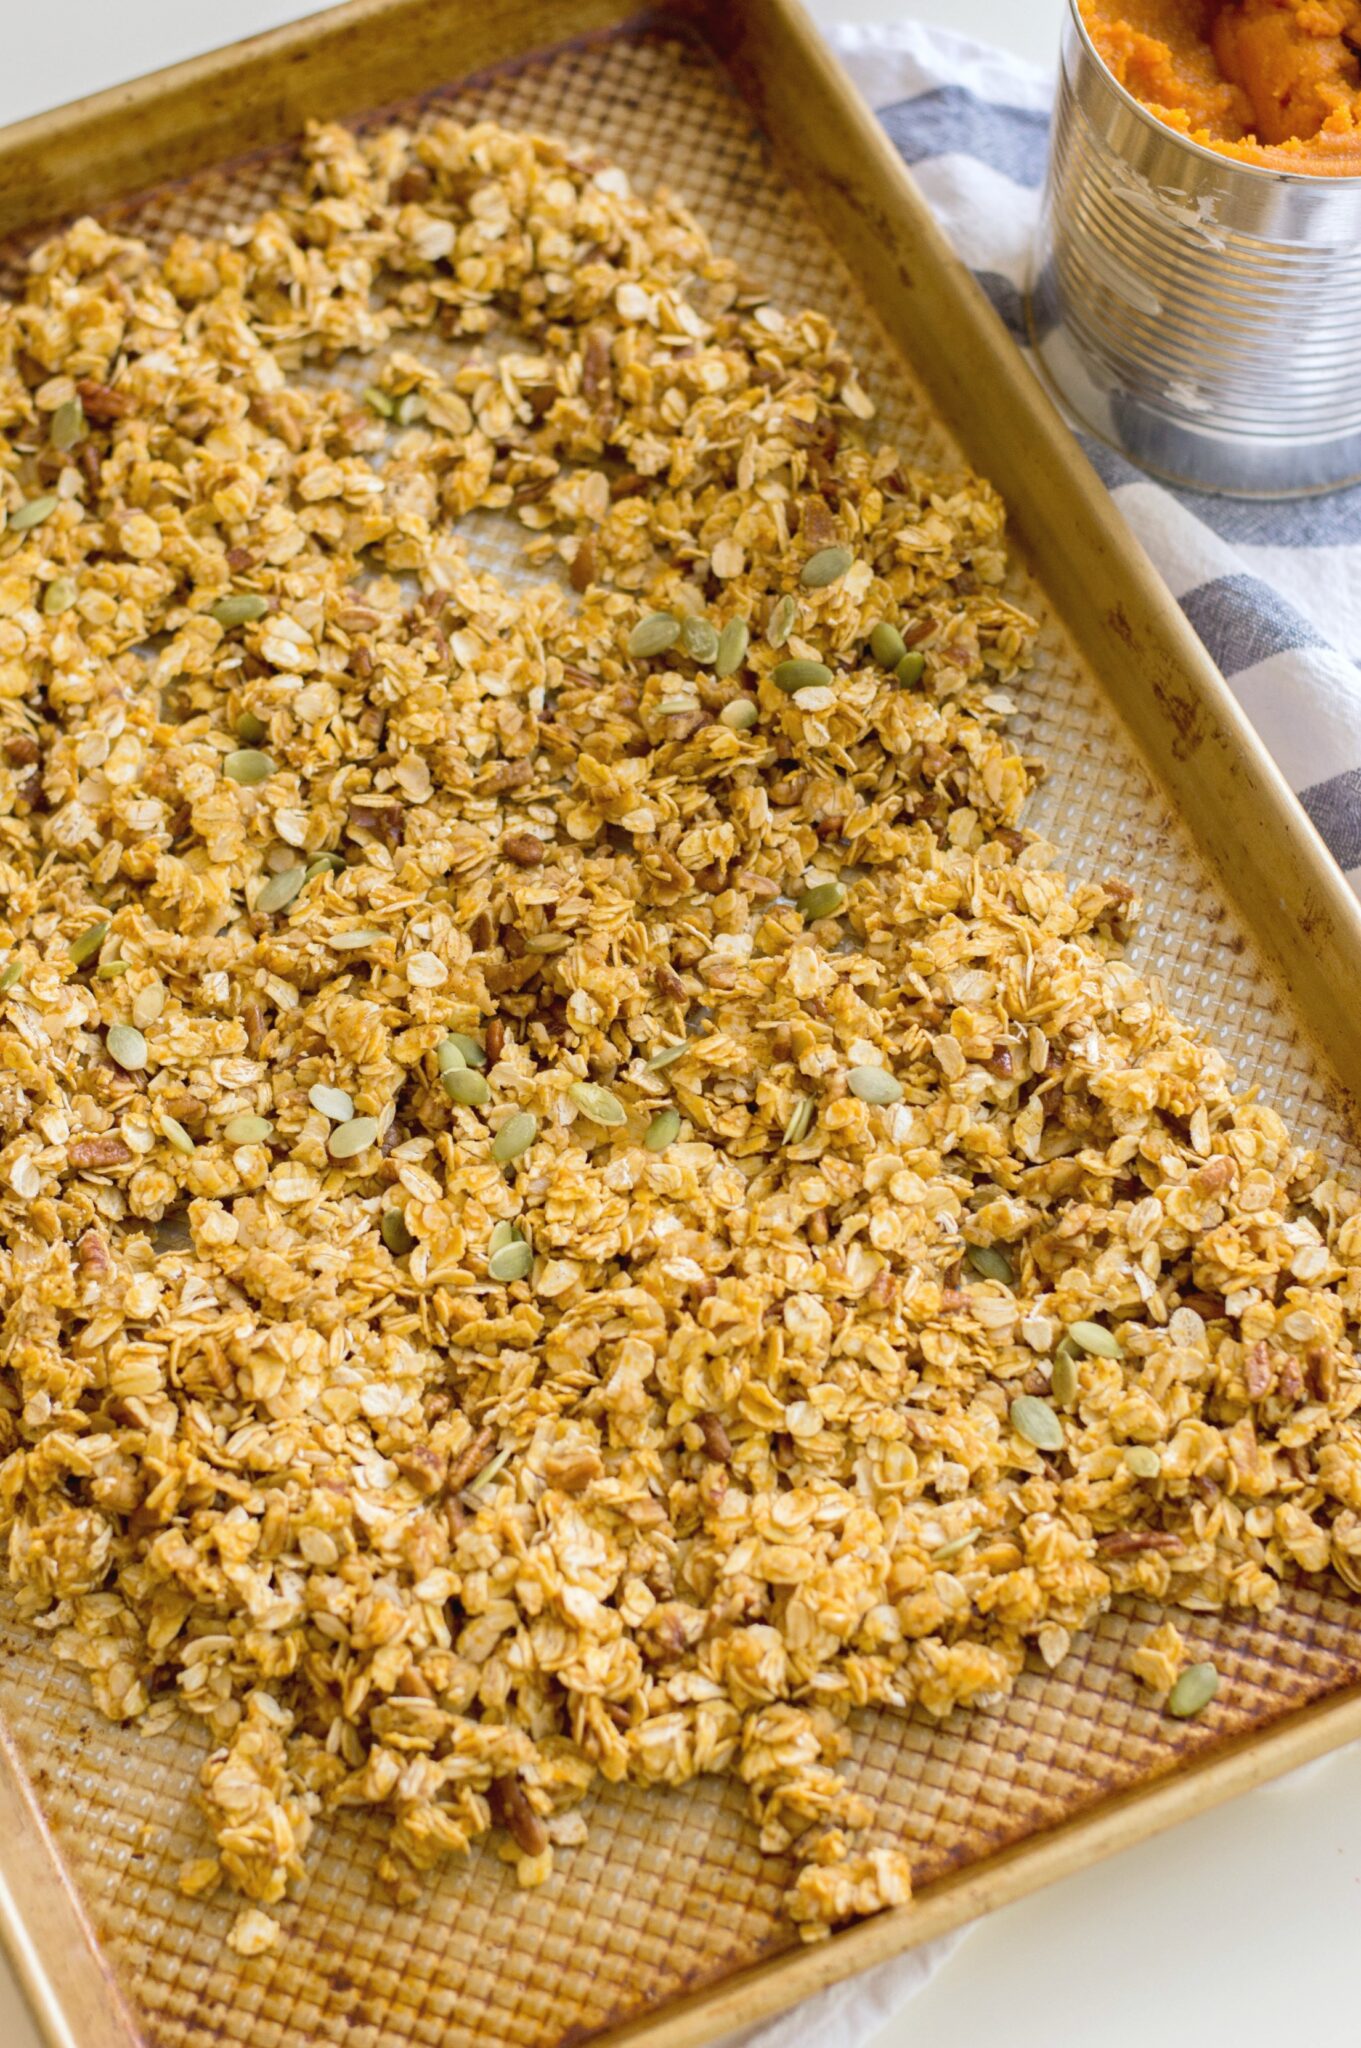 A tray of prepared and baked Pumpkin Maple Pecan granola on a baking sheet.